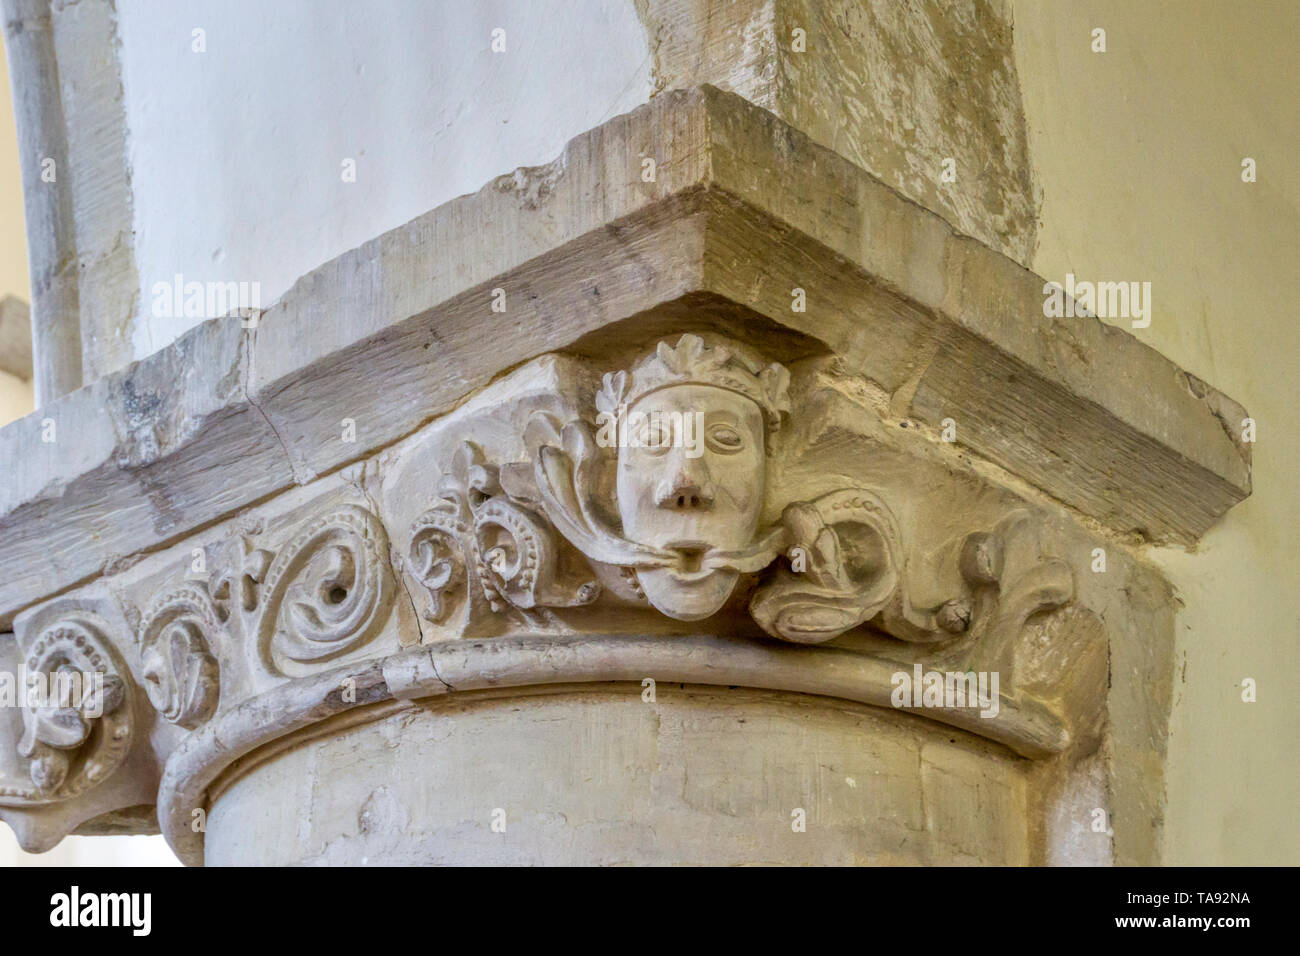 Unusual Green King or Crowned Green Man carved on the capital of a Norman pillar in St Nicholas church at St Nicholas-at-Wade in Kent. Stock Photo